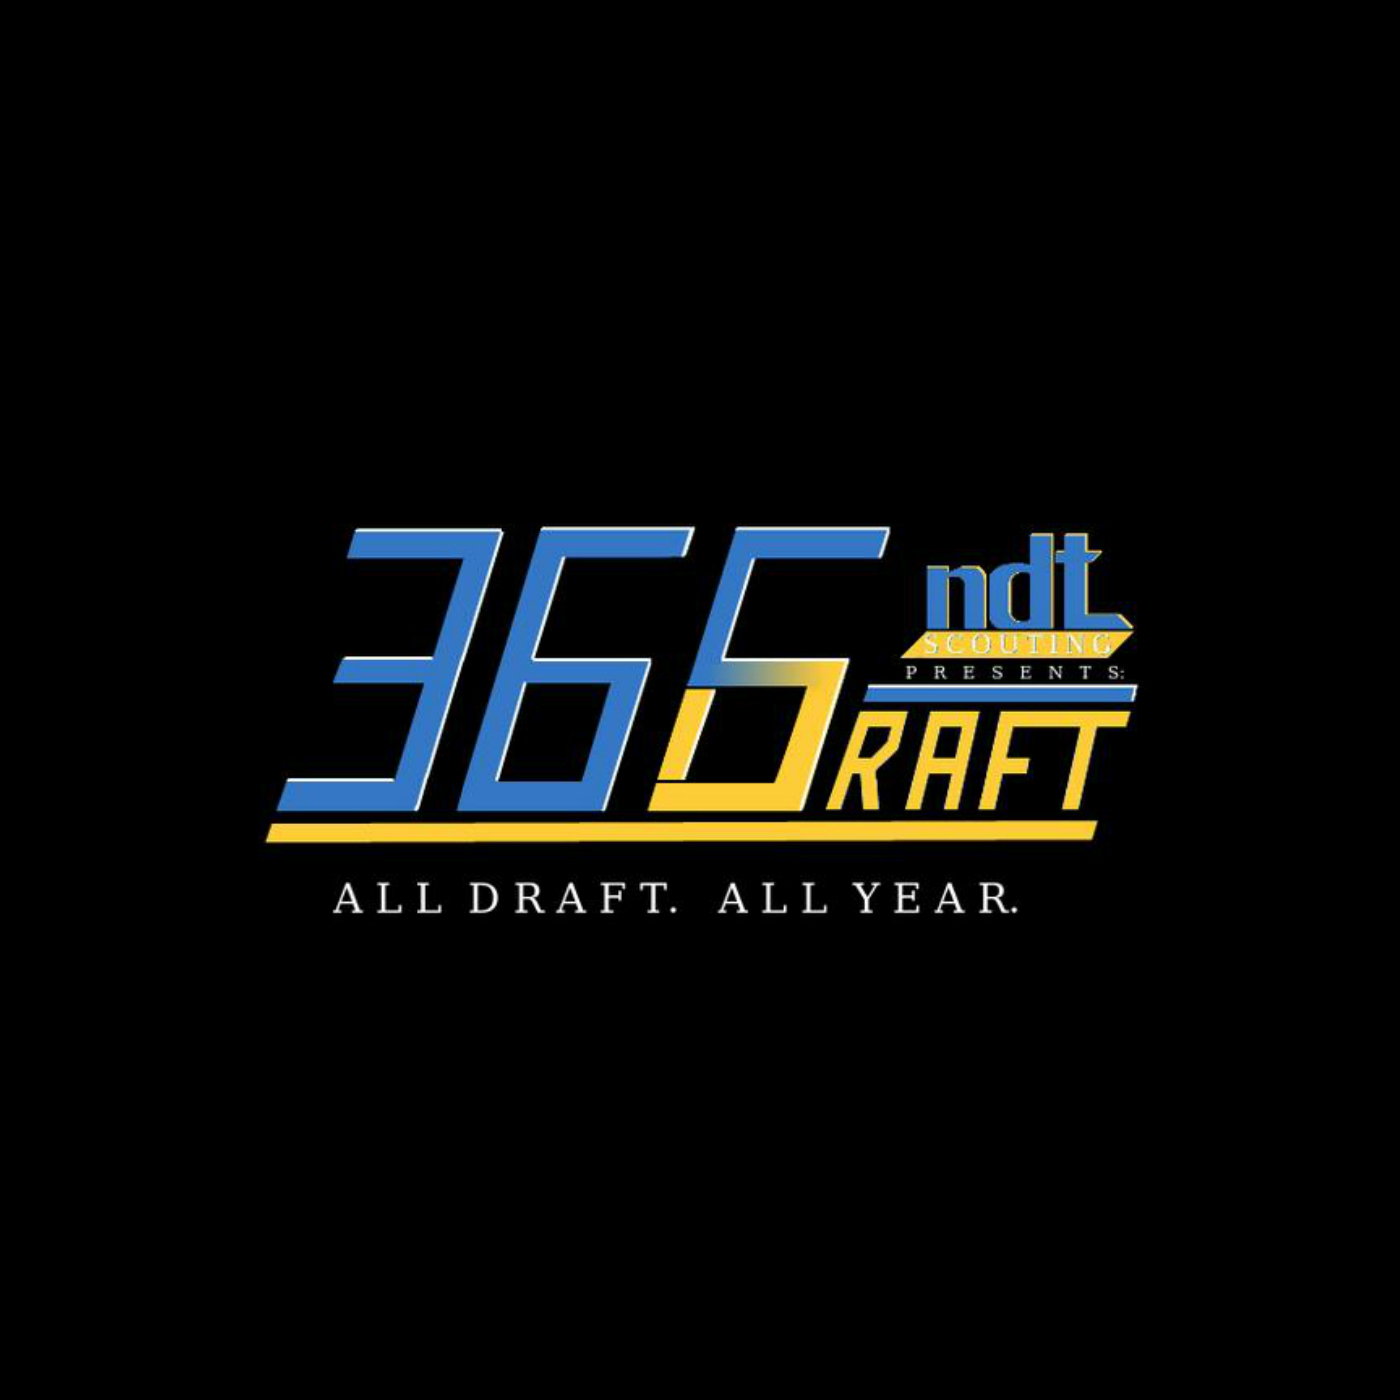 NDT Scouting's 365 Draft Weekly Podcast